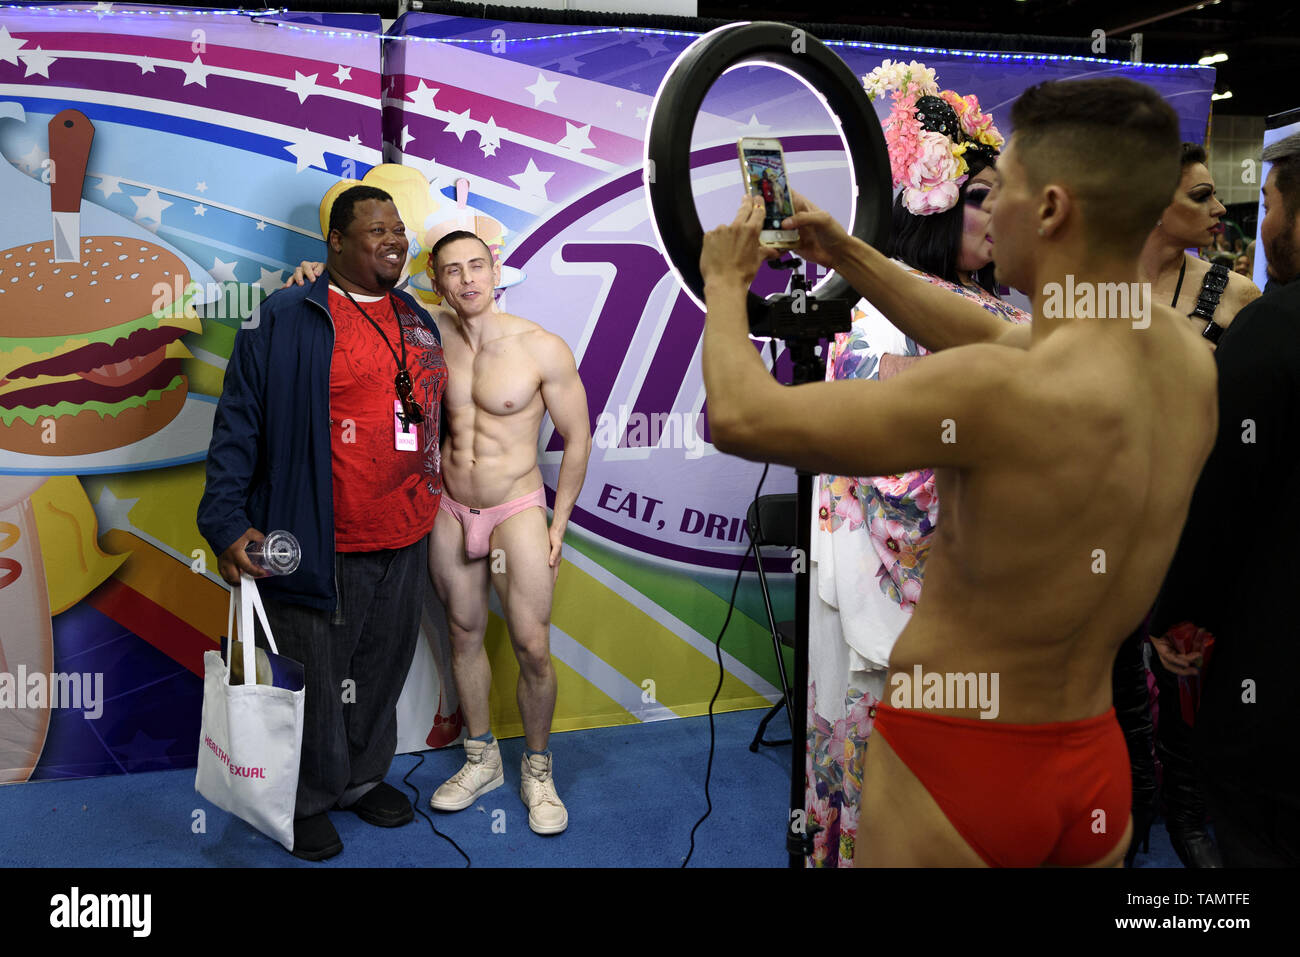 Los Angeles, California, USA. 15th Mar, 2019. (EDITORS NOTE: Image contains nudity.) Attendees poses for a picture at RuPaul's DragCon LA 2019 in Los Angeles, California. The annual three-day RuPaul's DragCon is the world's largest drag culture convention and takes place in New York and Los Angeles. Credit: Ronen Tivony/SOPA Images/ZUMA Wire/Alamy Live News Stock Photo